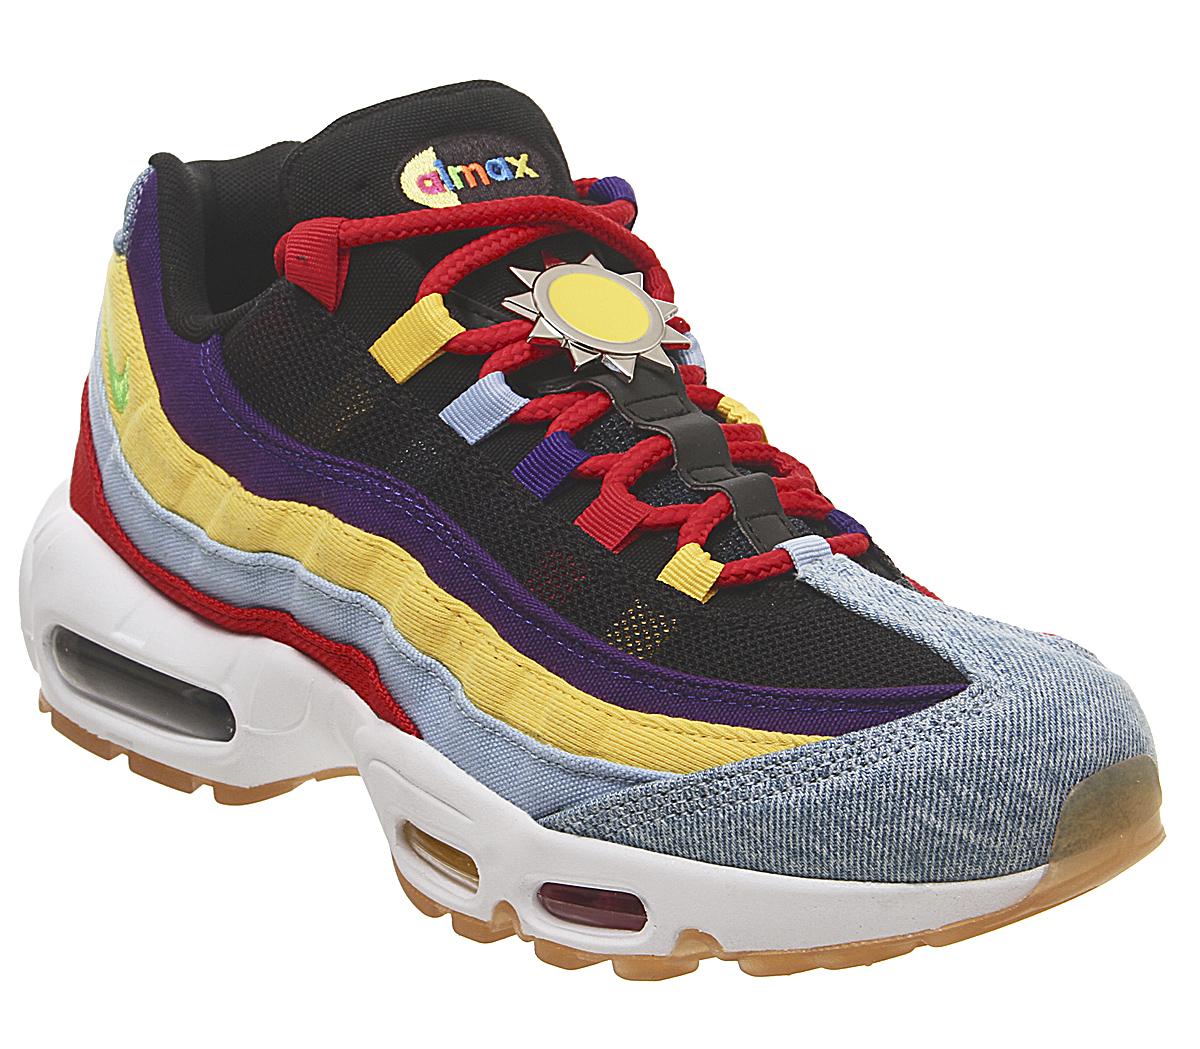 Nike Air Max 95 Trainers Hyper Violet 